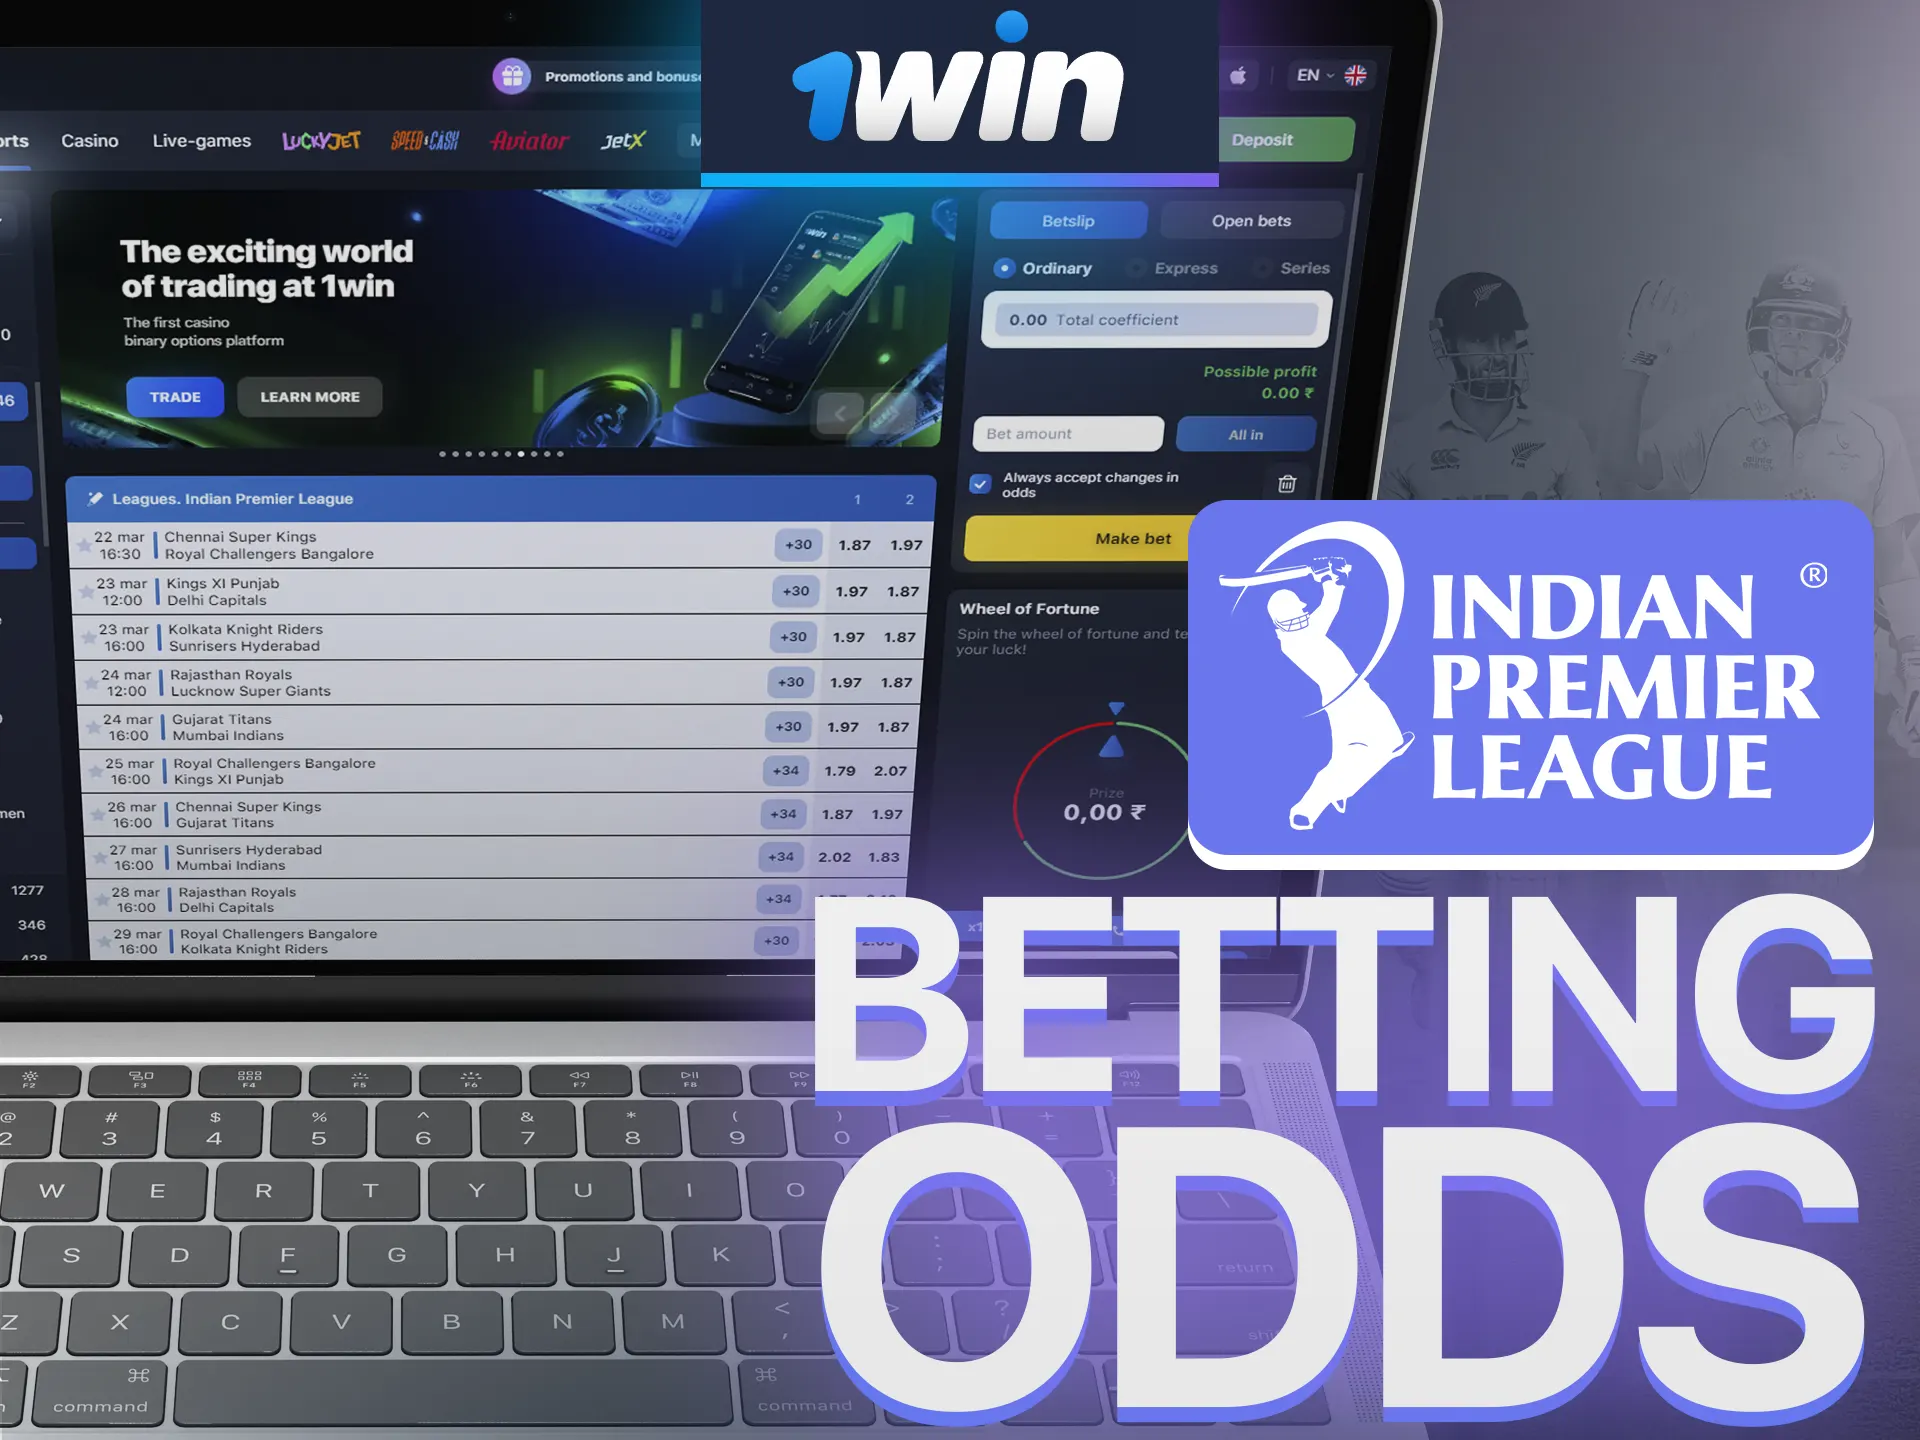 Bet on IPL with 1Win for favorable odds.